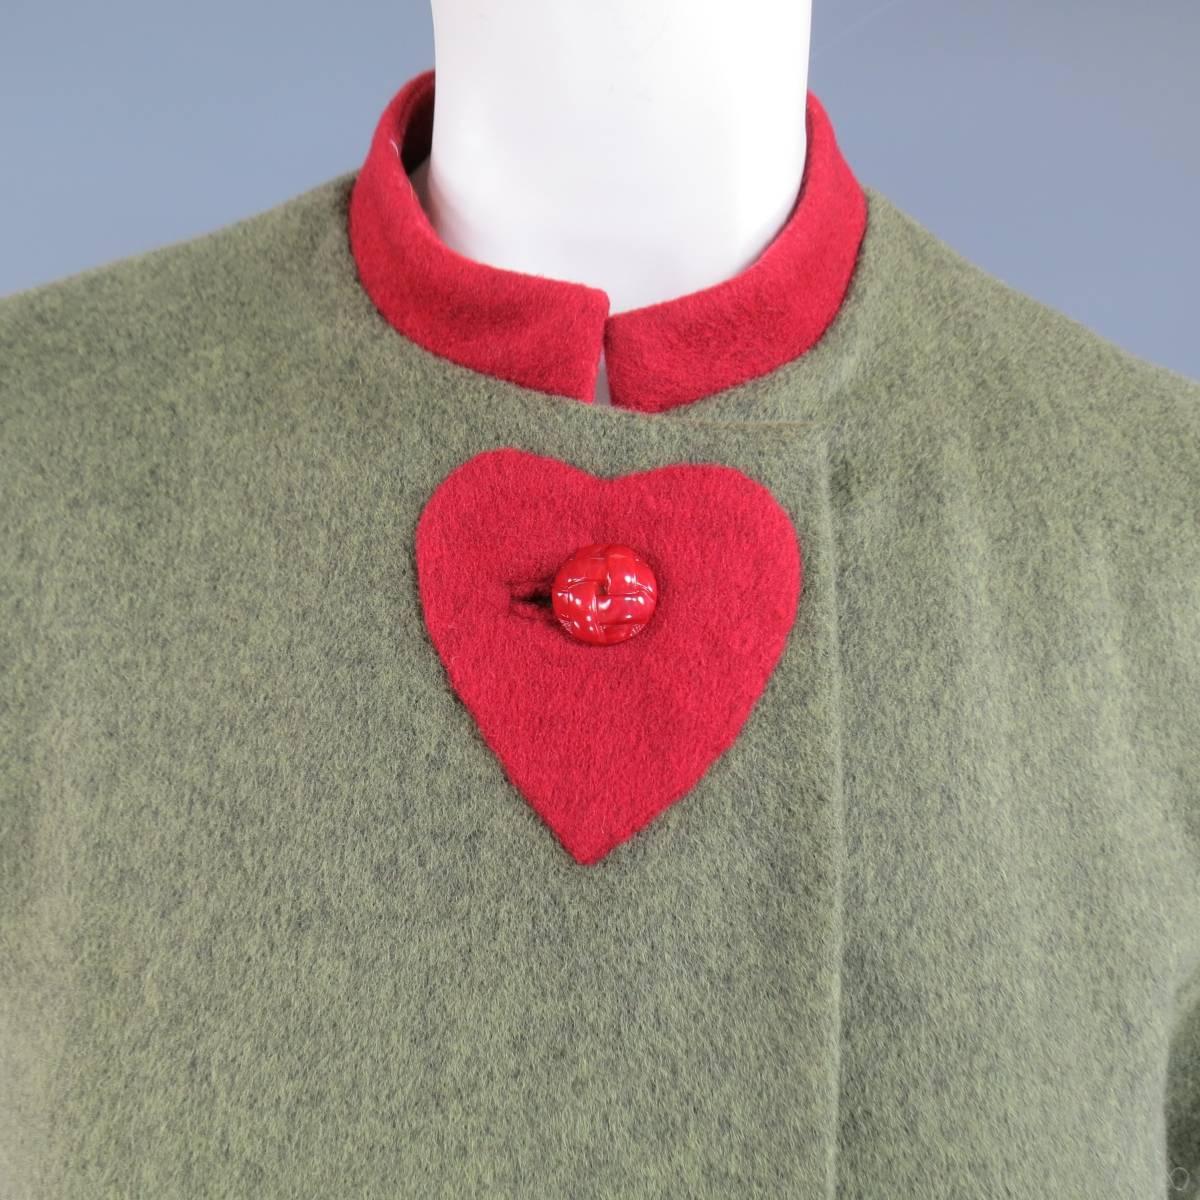 Vintage CAROLINA HERRERA skirt suit includes a jacket in a light olive green Heather textured wool cashmere blend felt featuring a red stand up band collar, red braid textured buttons, and red heart patches along the closure with a matching red